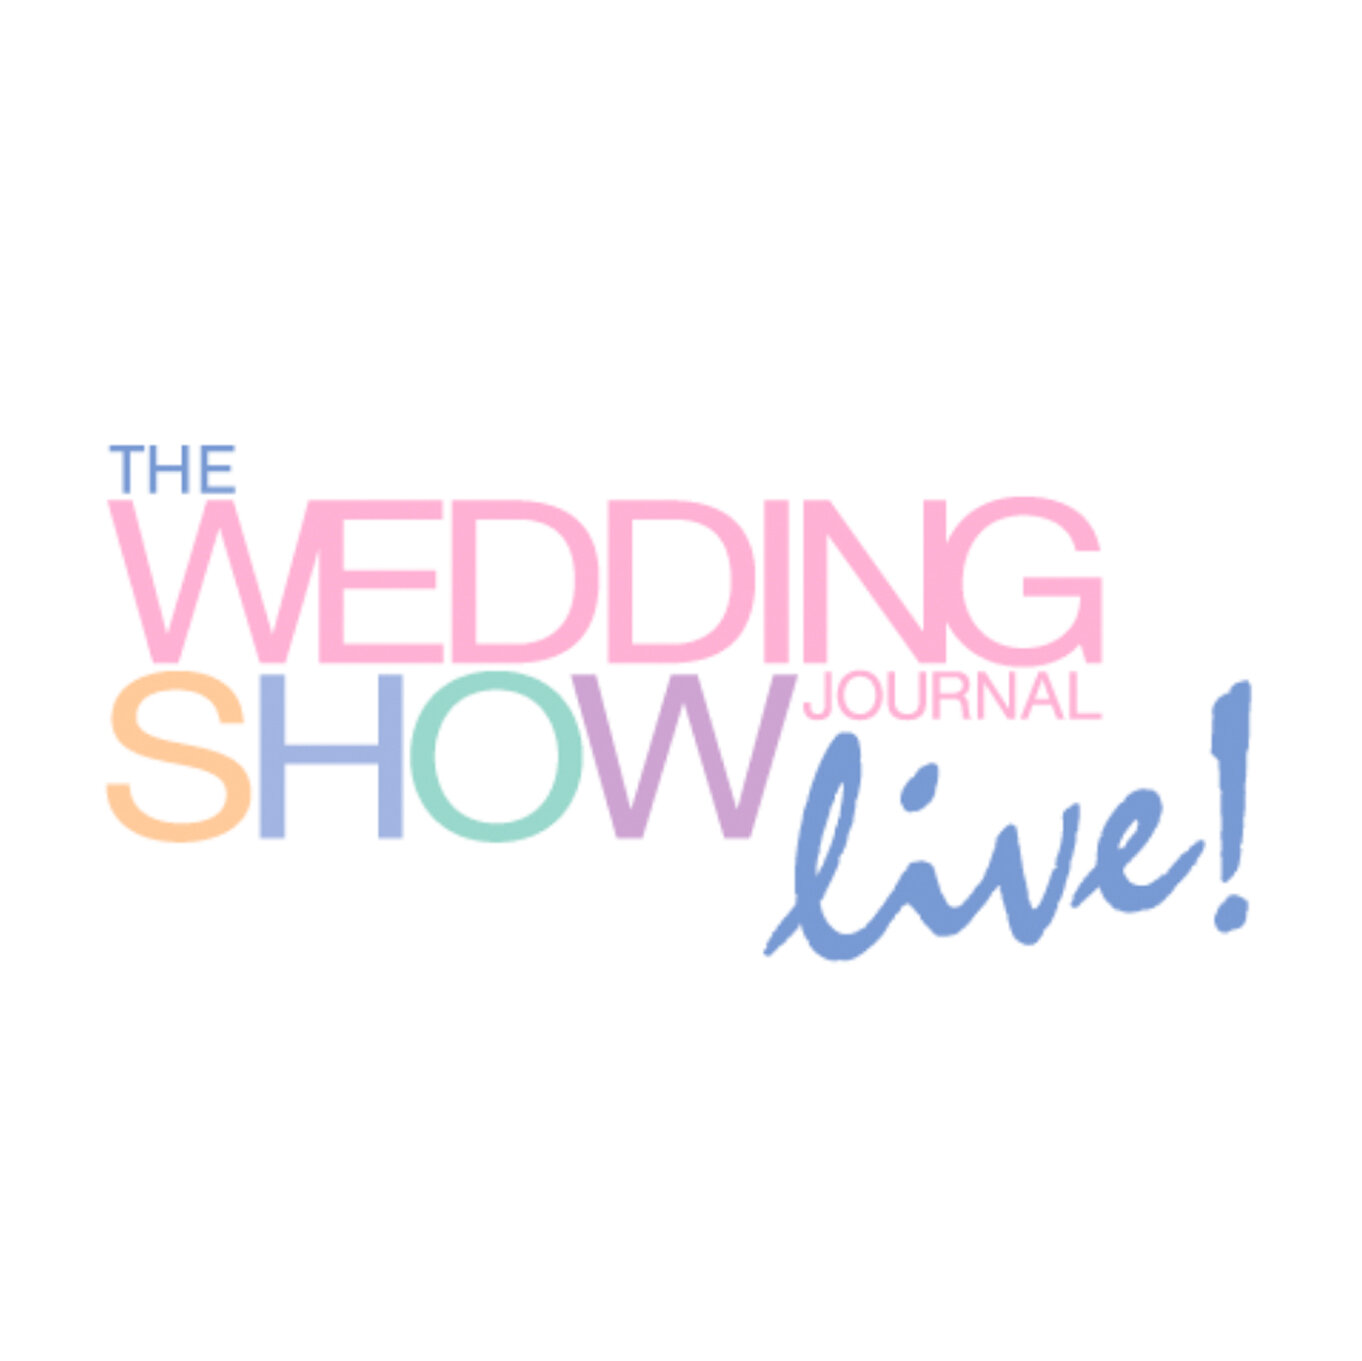 The Wedding Journal Show Live